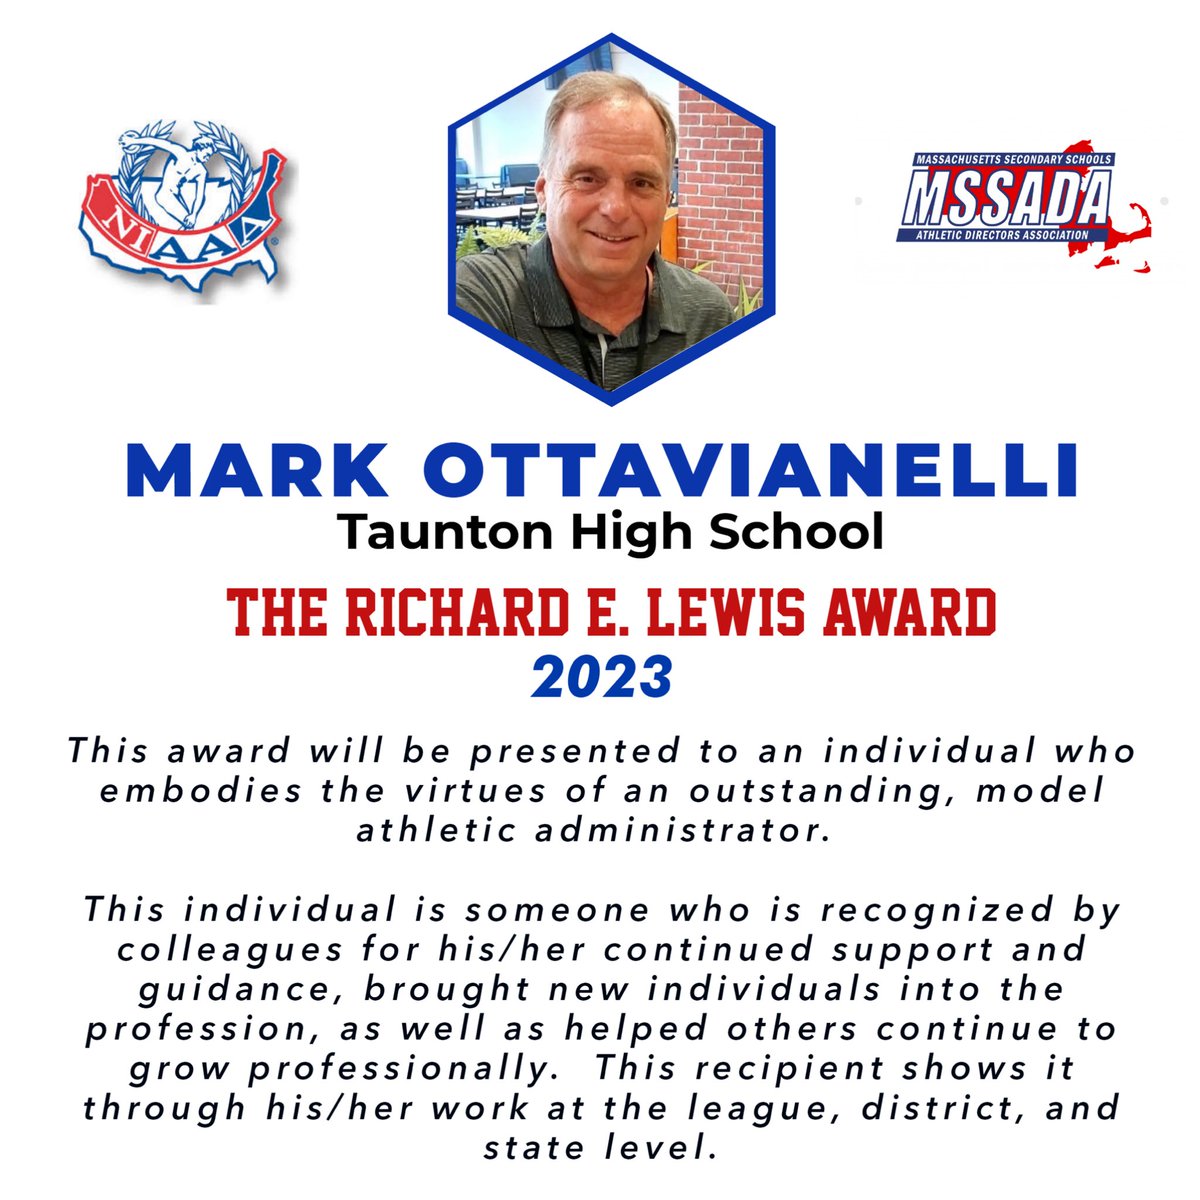 Congrats to Mark Ottavianelli on being the recipient of the Richard E. Lewis award!